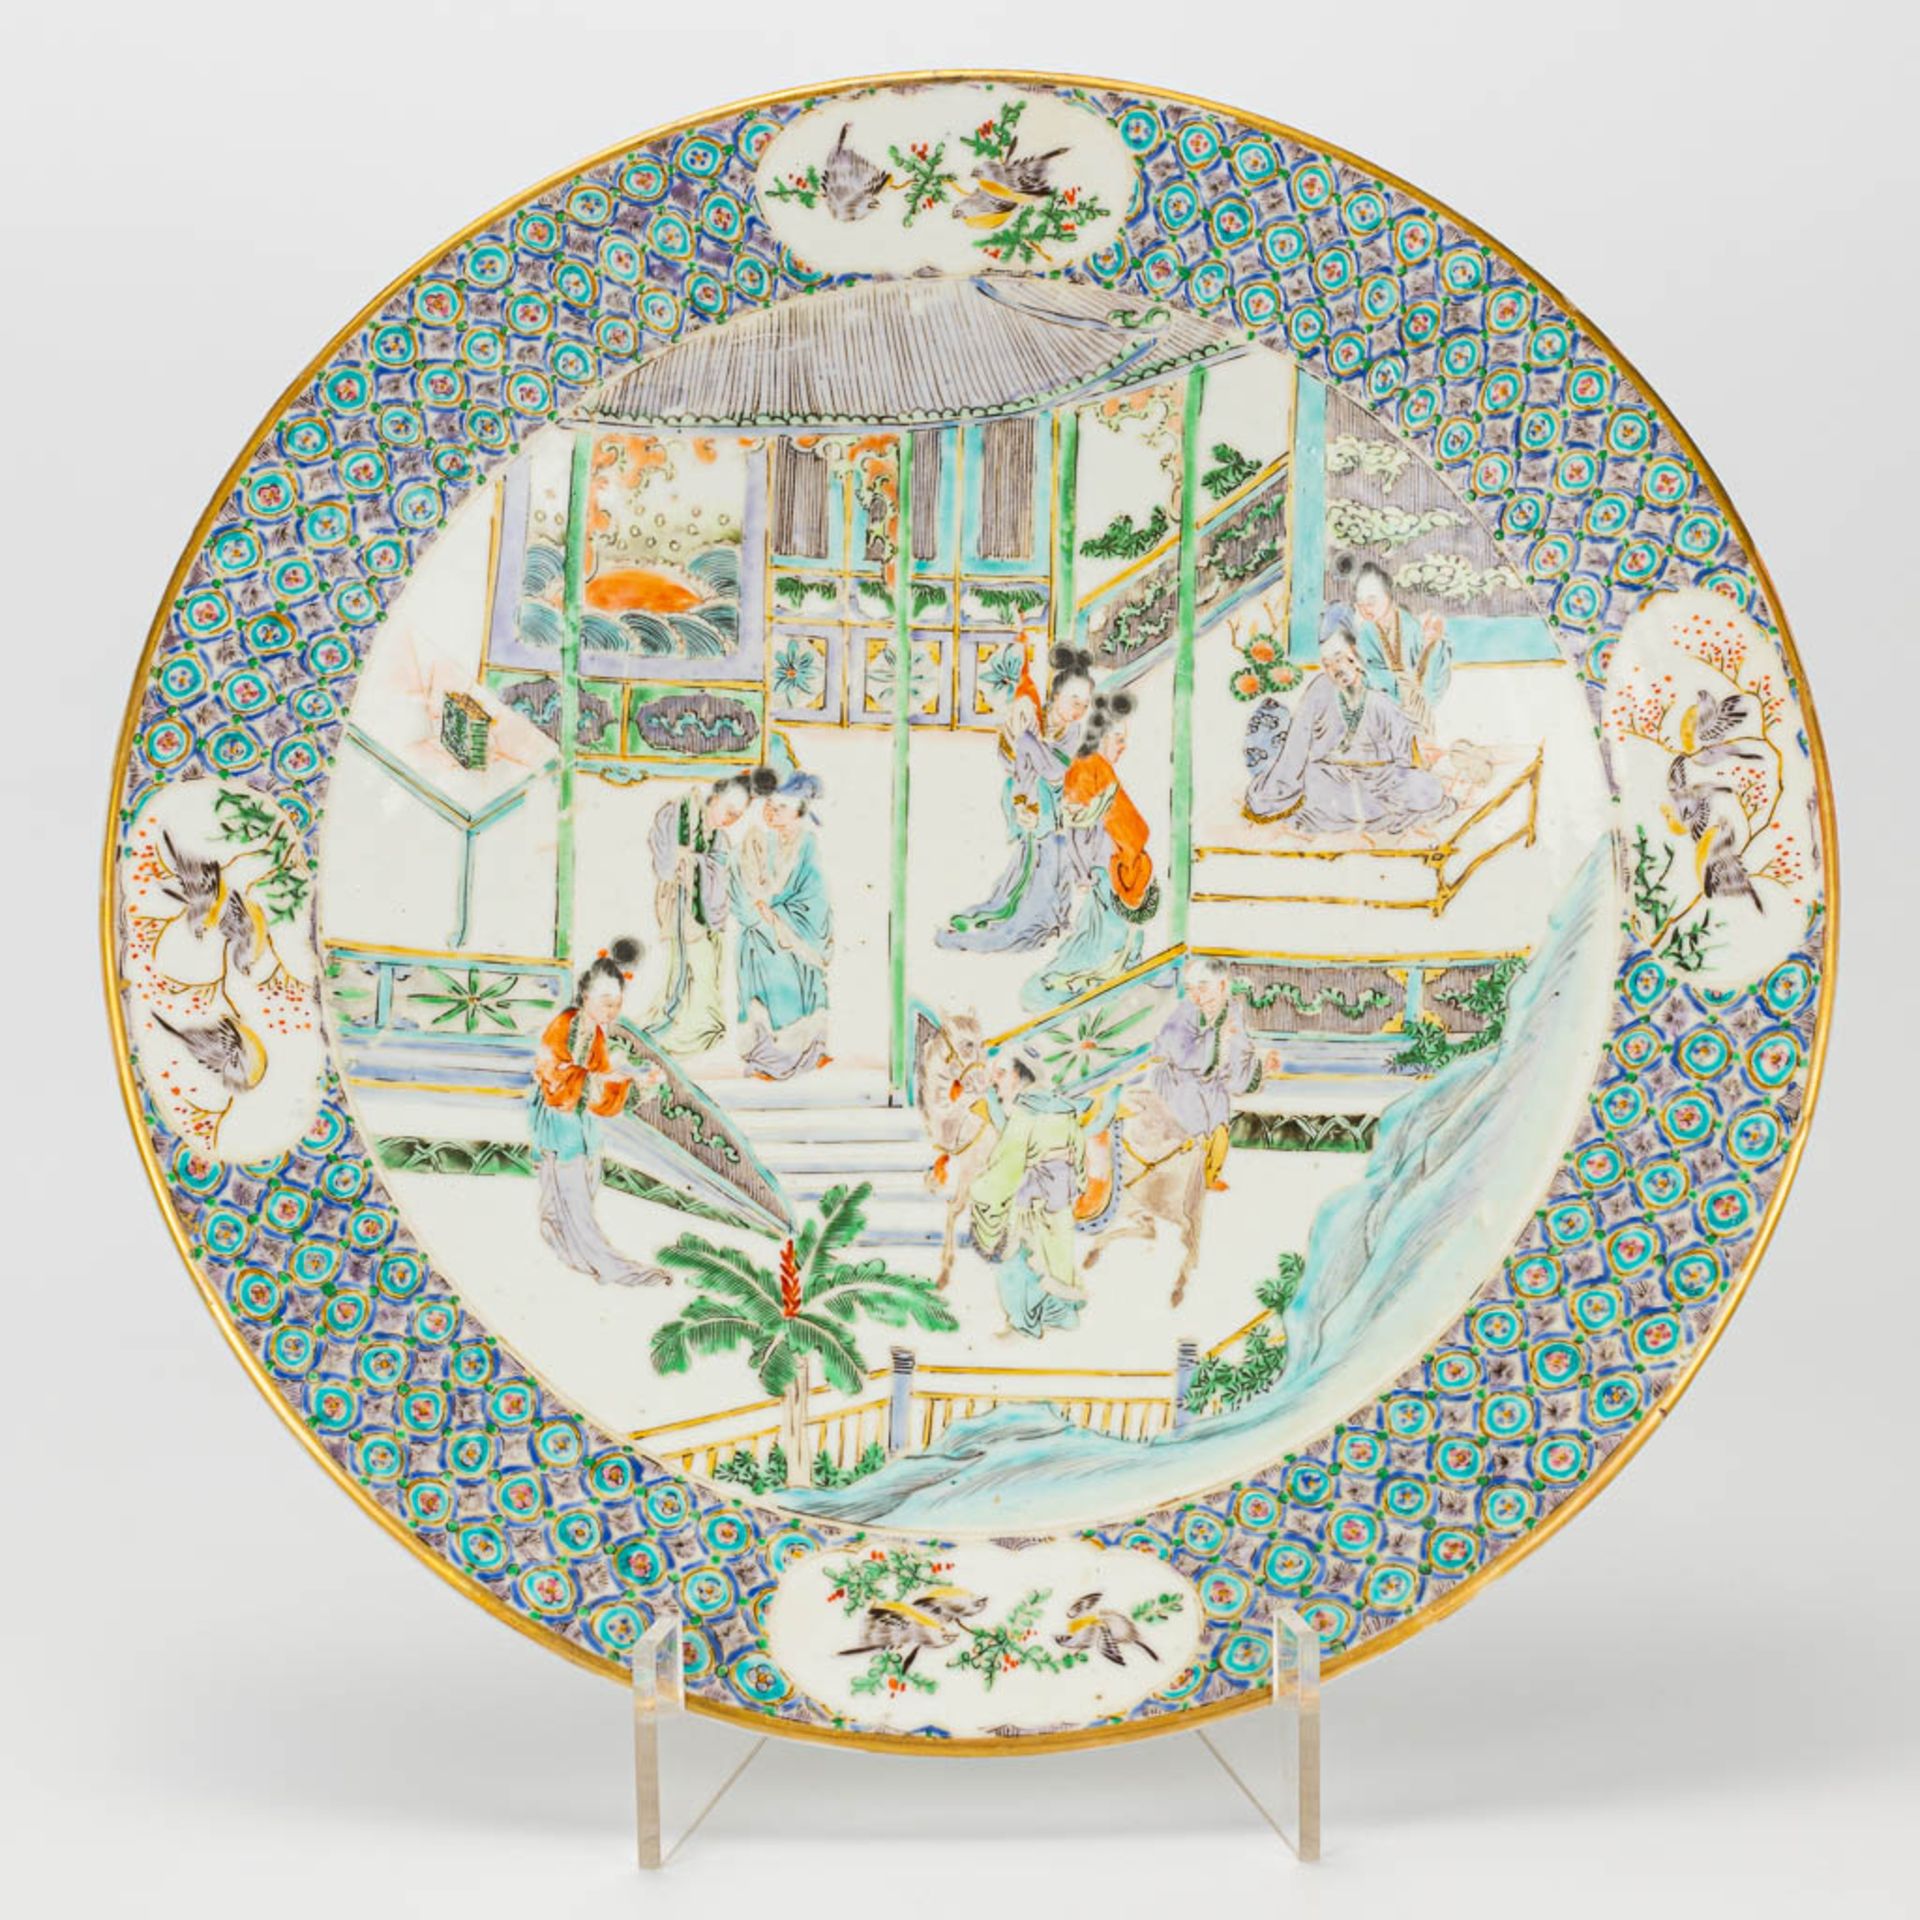 A pair of plates made of Chinese porcelain in Kanton style. 19th century. - Image 13 of 24